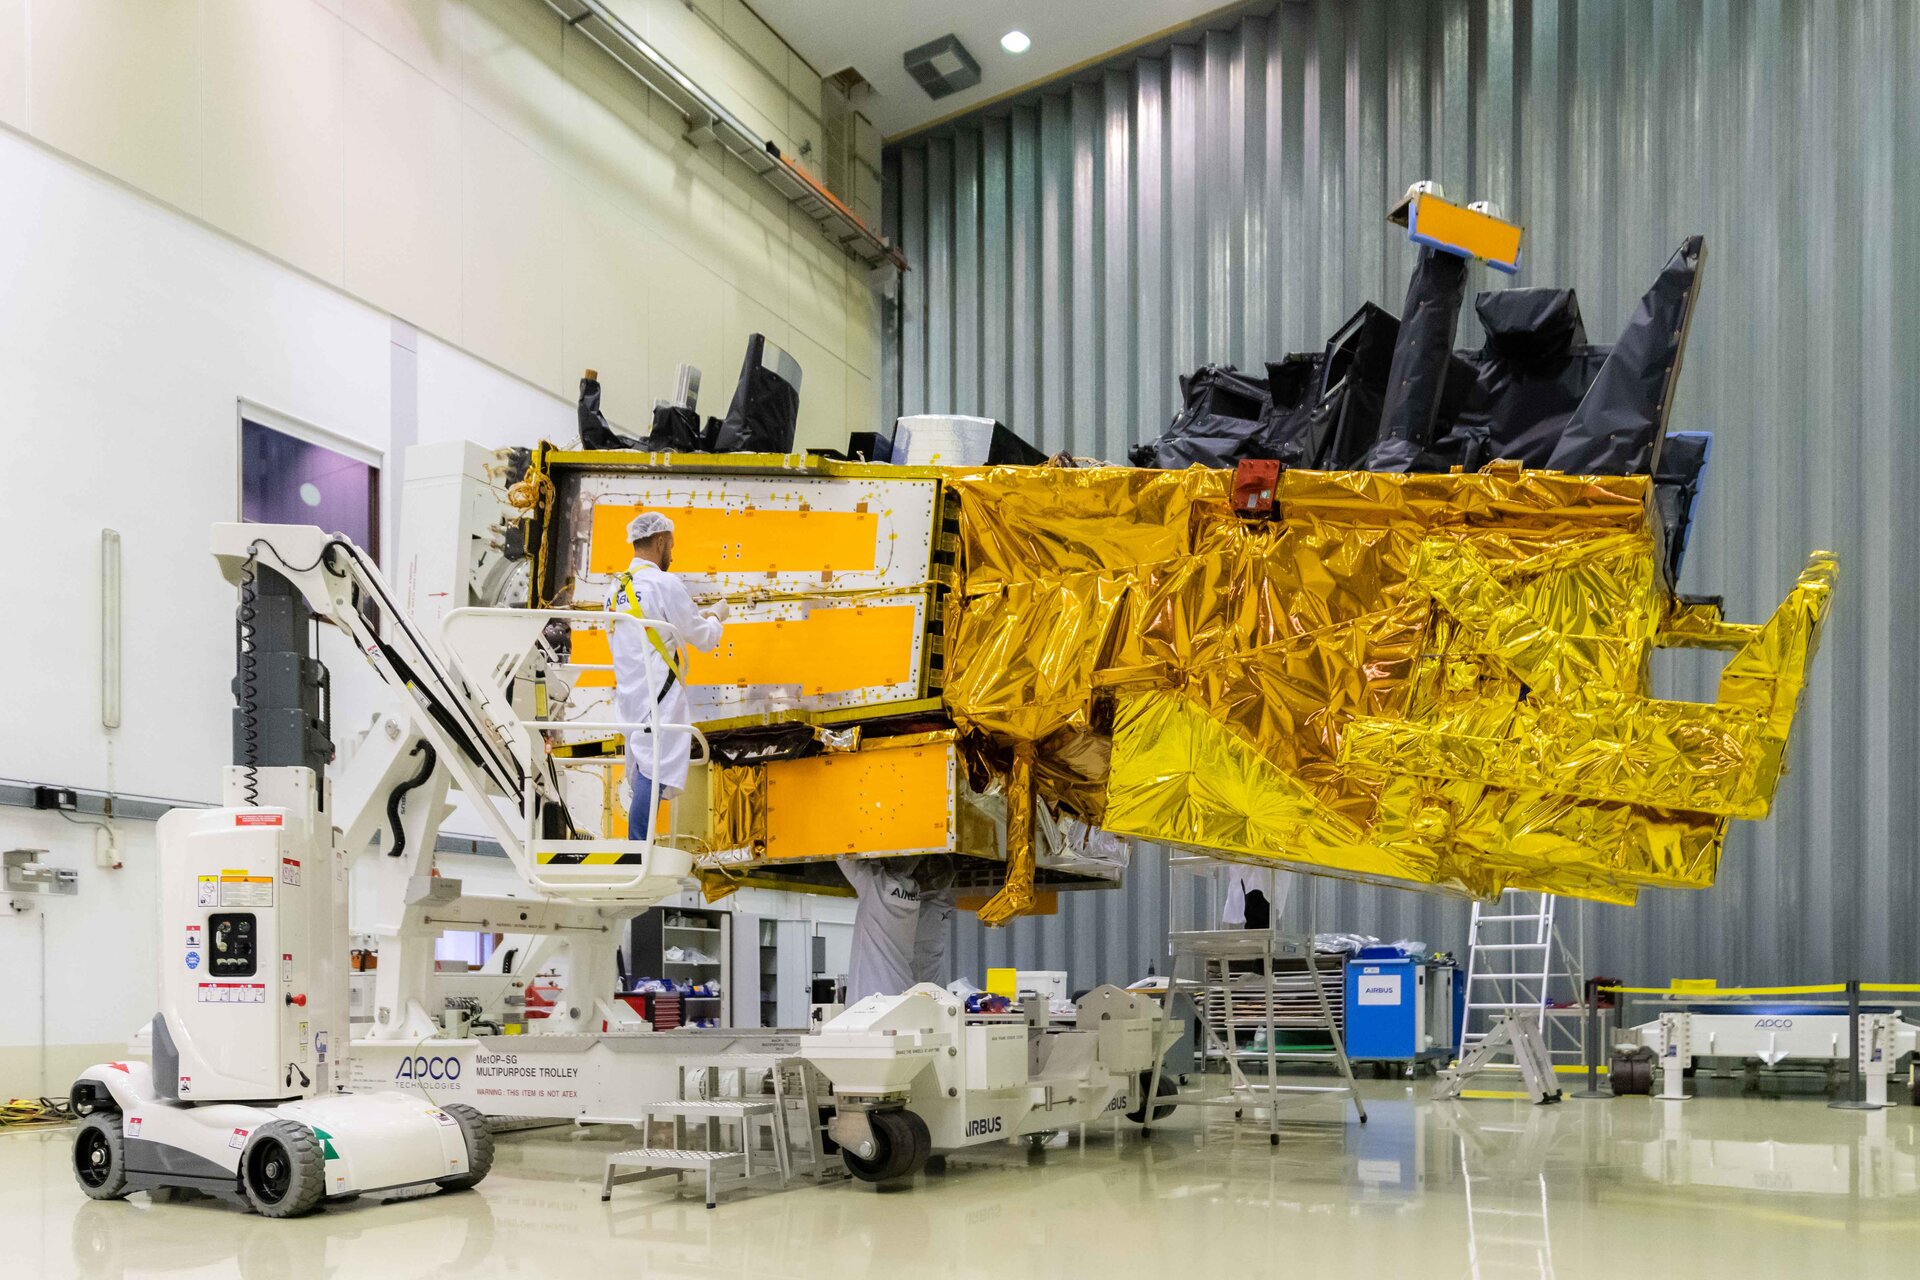 MetOp Second Generation (MOS) STM model 